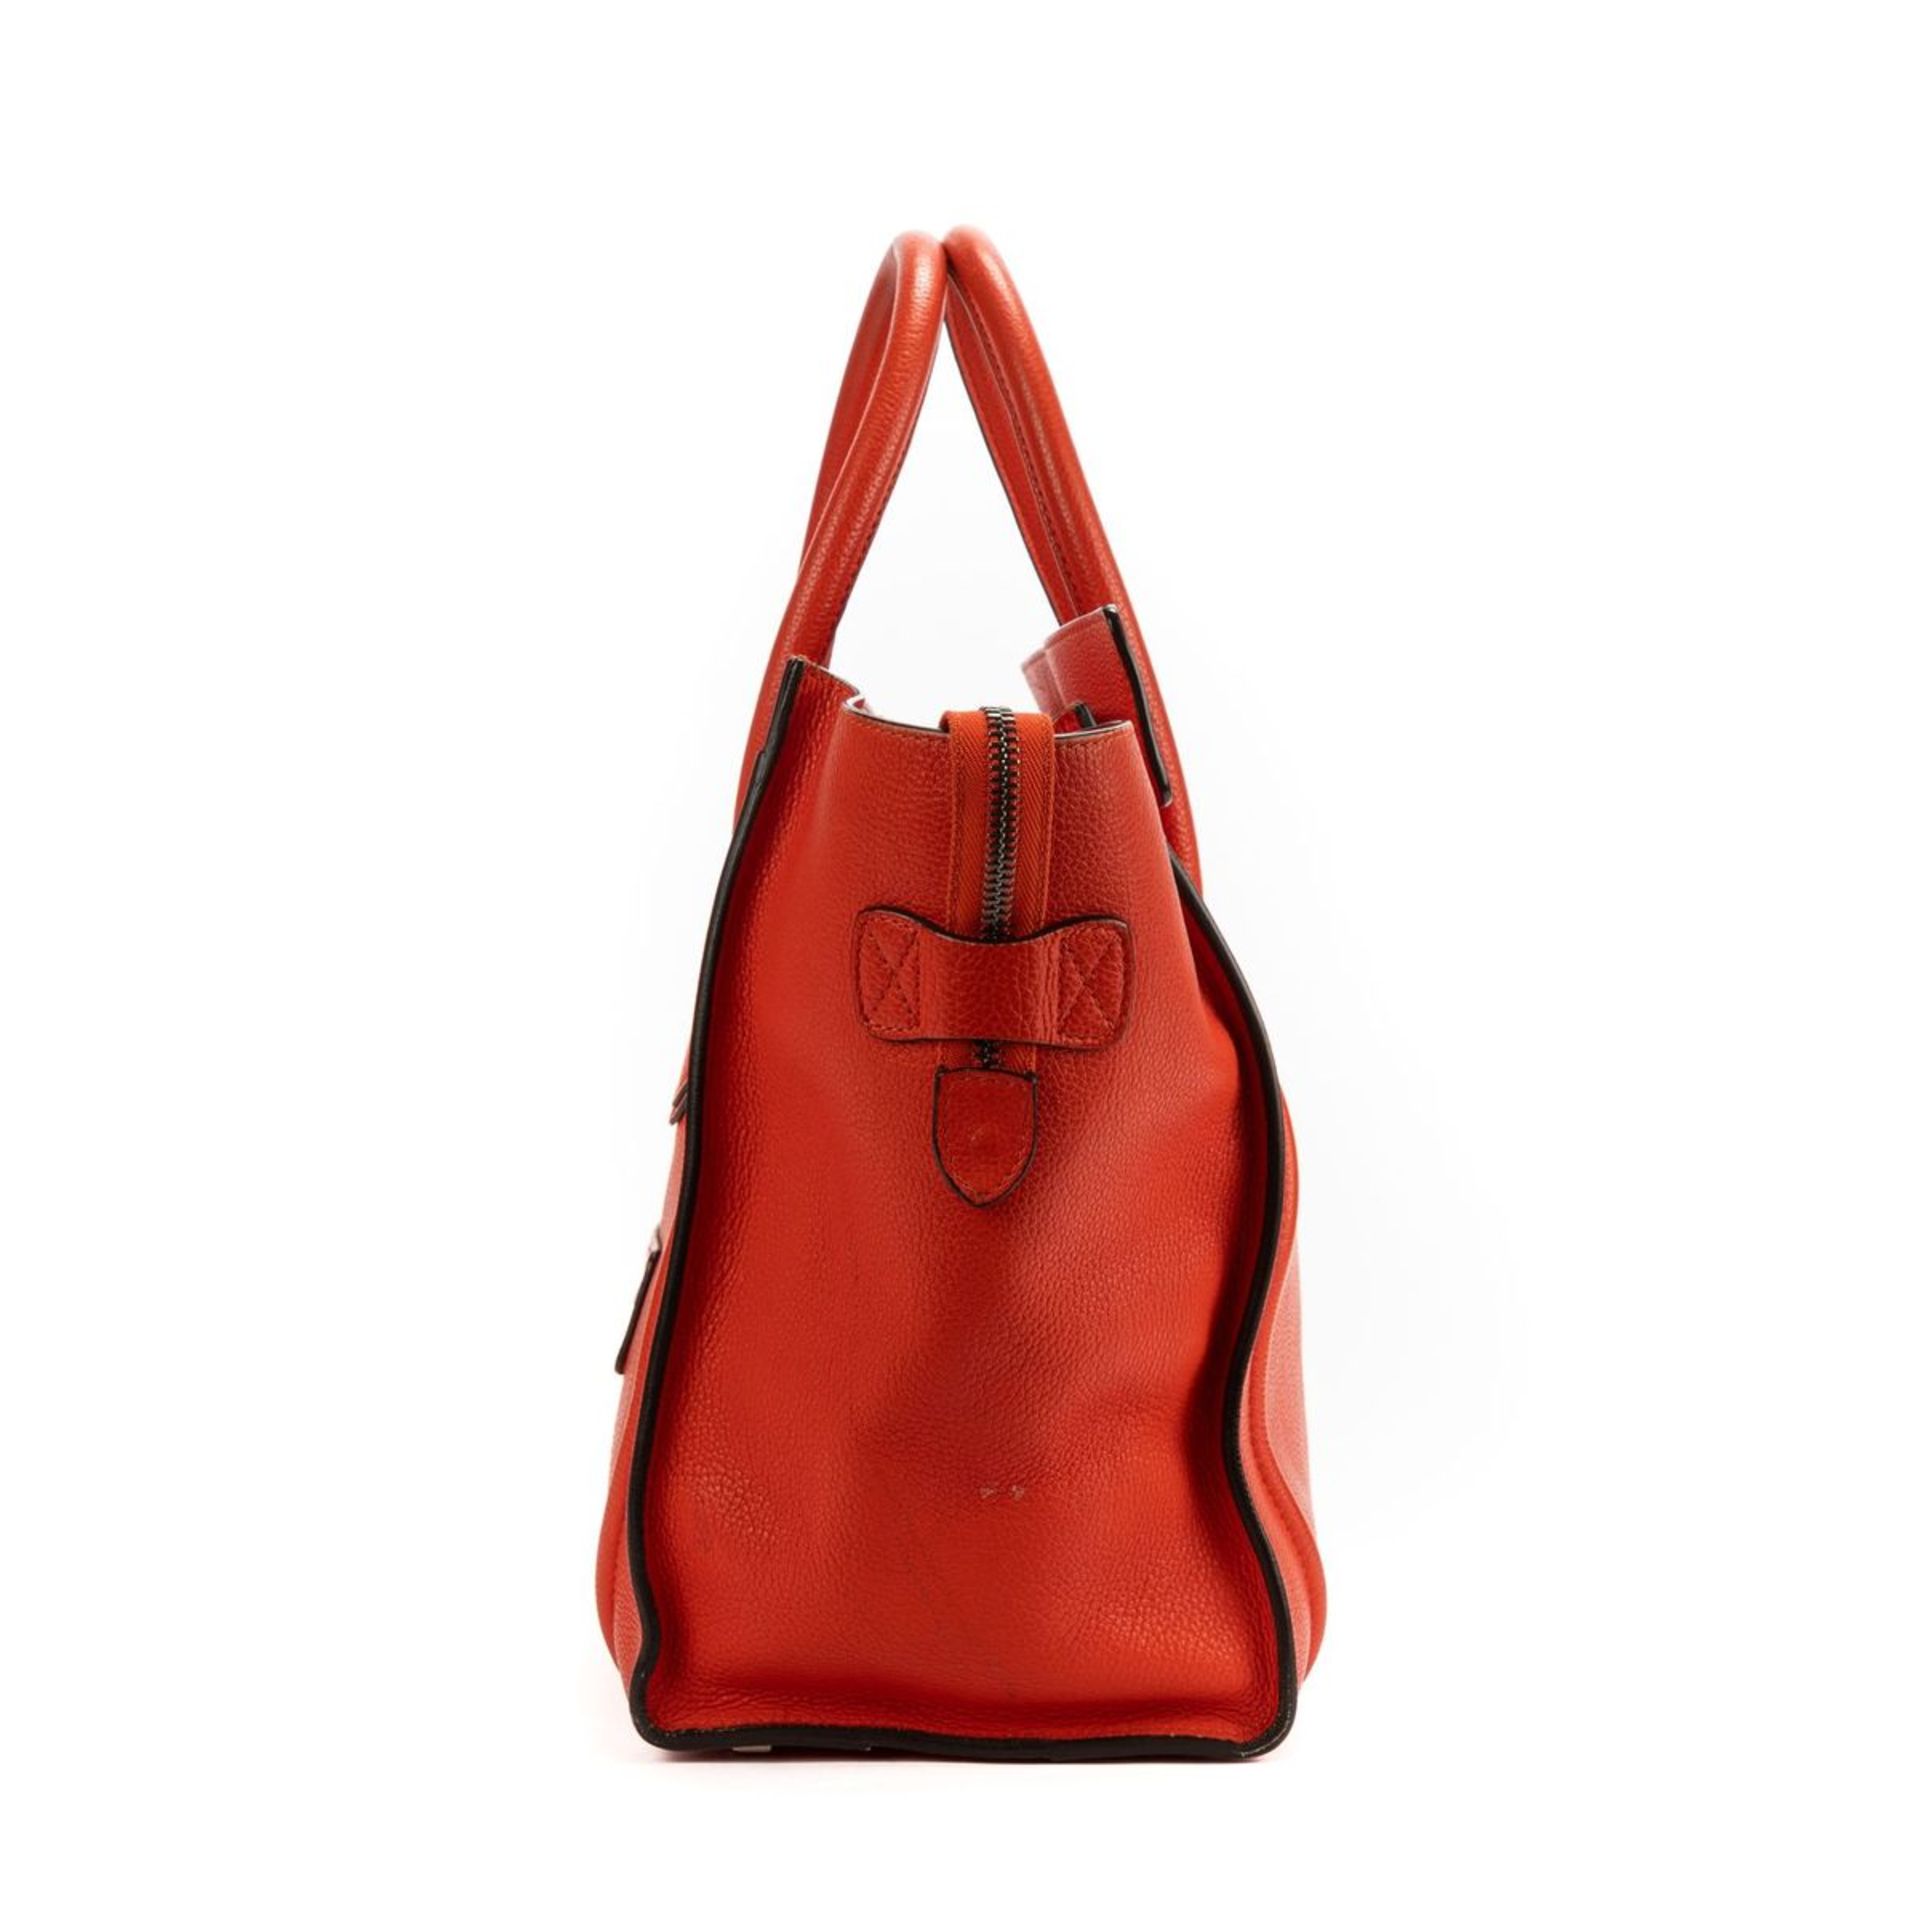 RRP £2300 Celine Luggage Tote Shoulder Bag in Coral - EAG3430 - Grade AB Please Contact Us - Image 4 of 4